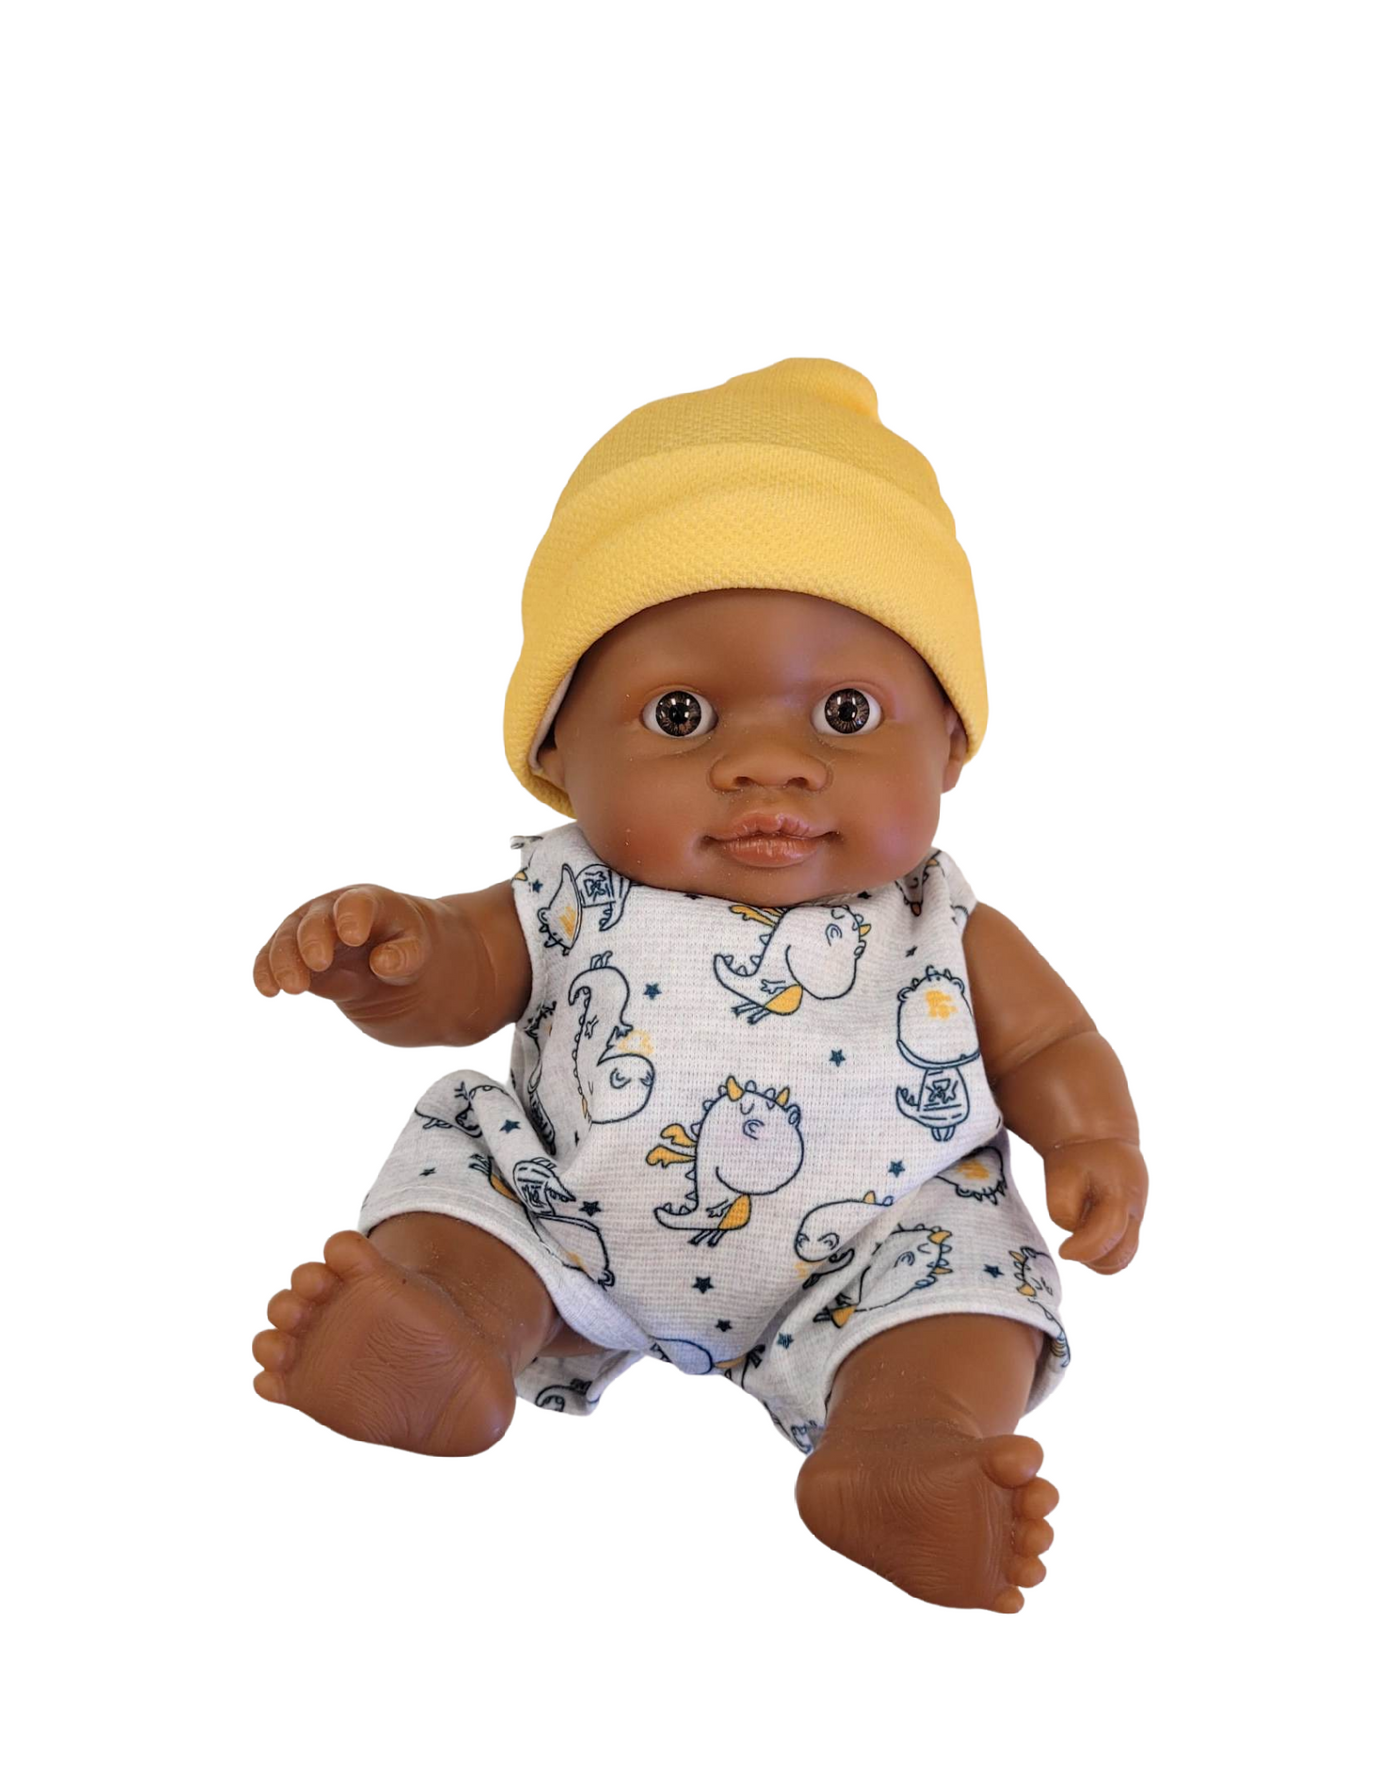 Peques doll - Olmo with yellow hat and pajamas - Paola Reina